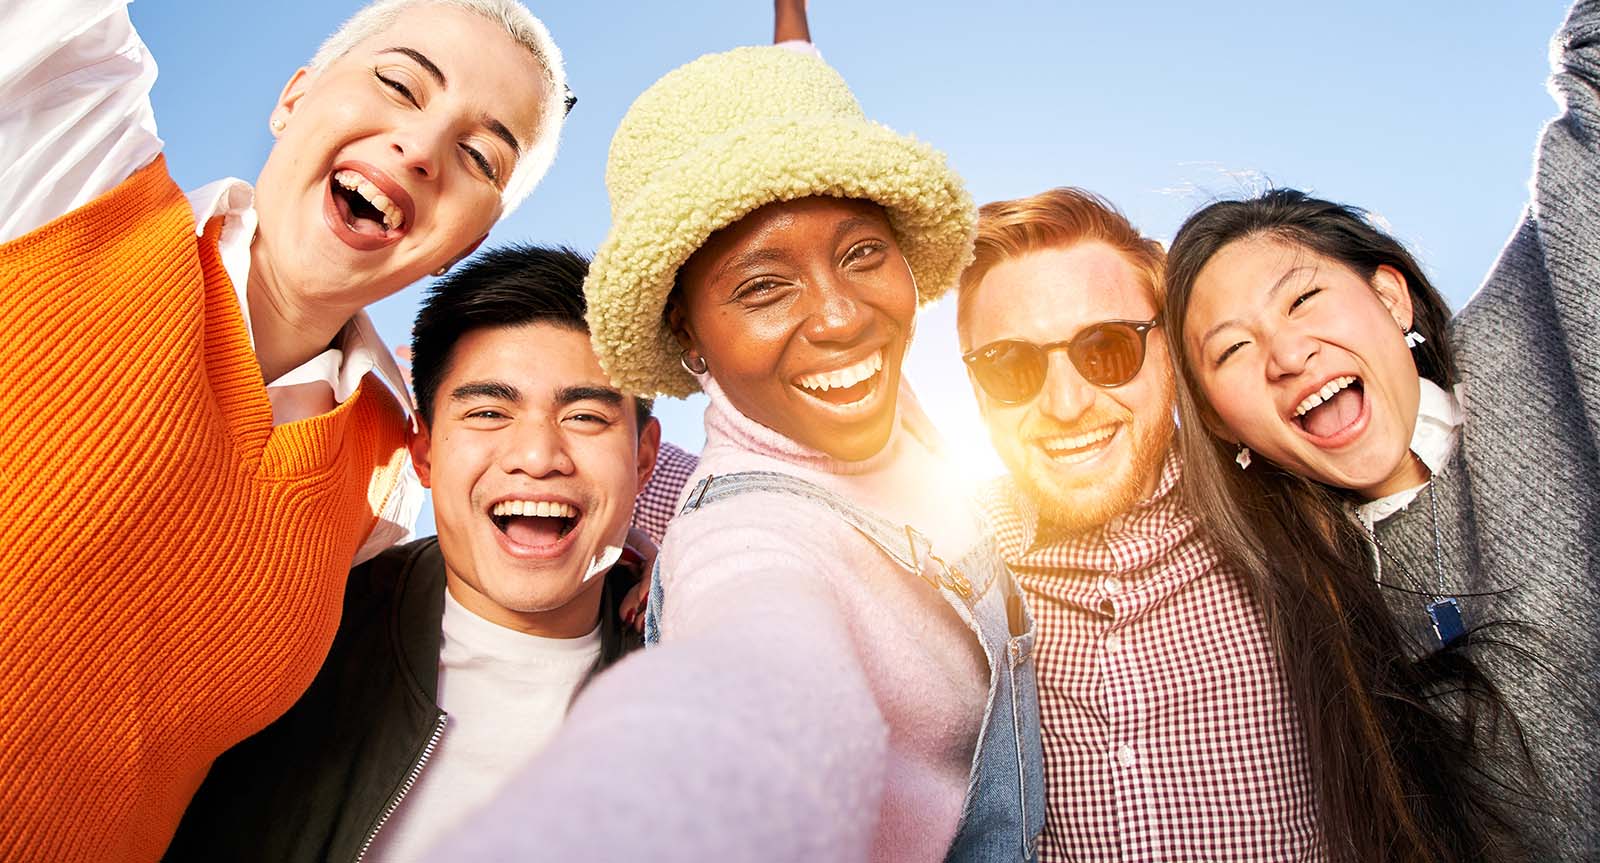 Smiling selfie of a happy group of multicultural friends looking at the camera. Portrait of cheerful multi-ethnic young people of diverse races having fun together. Community and friendship concept